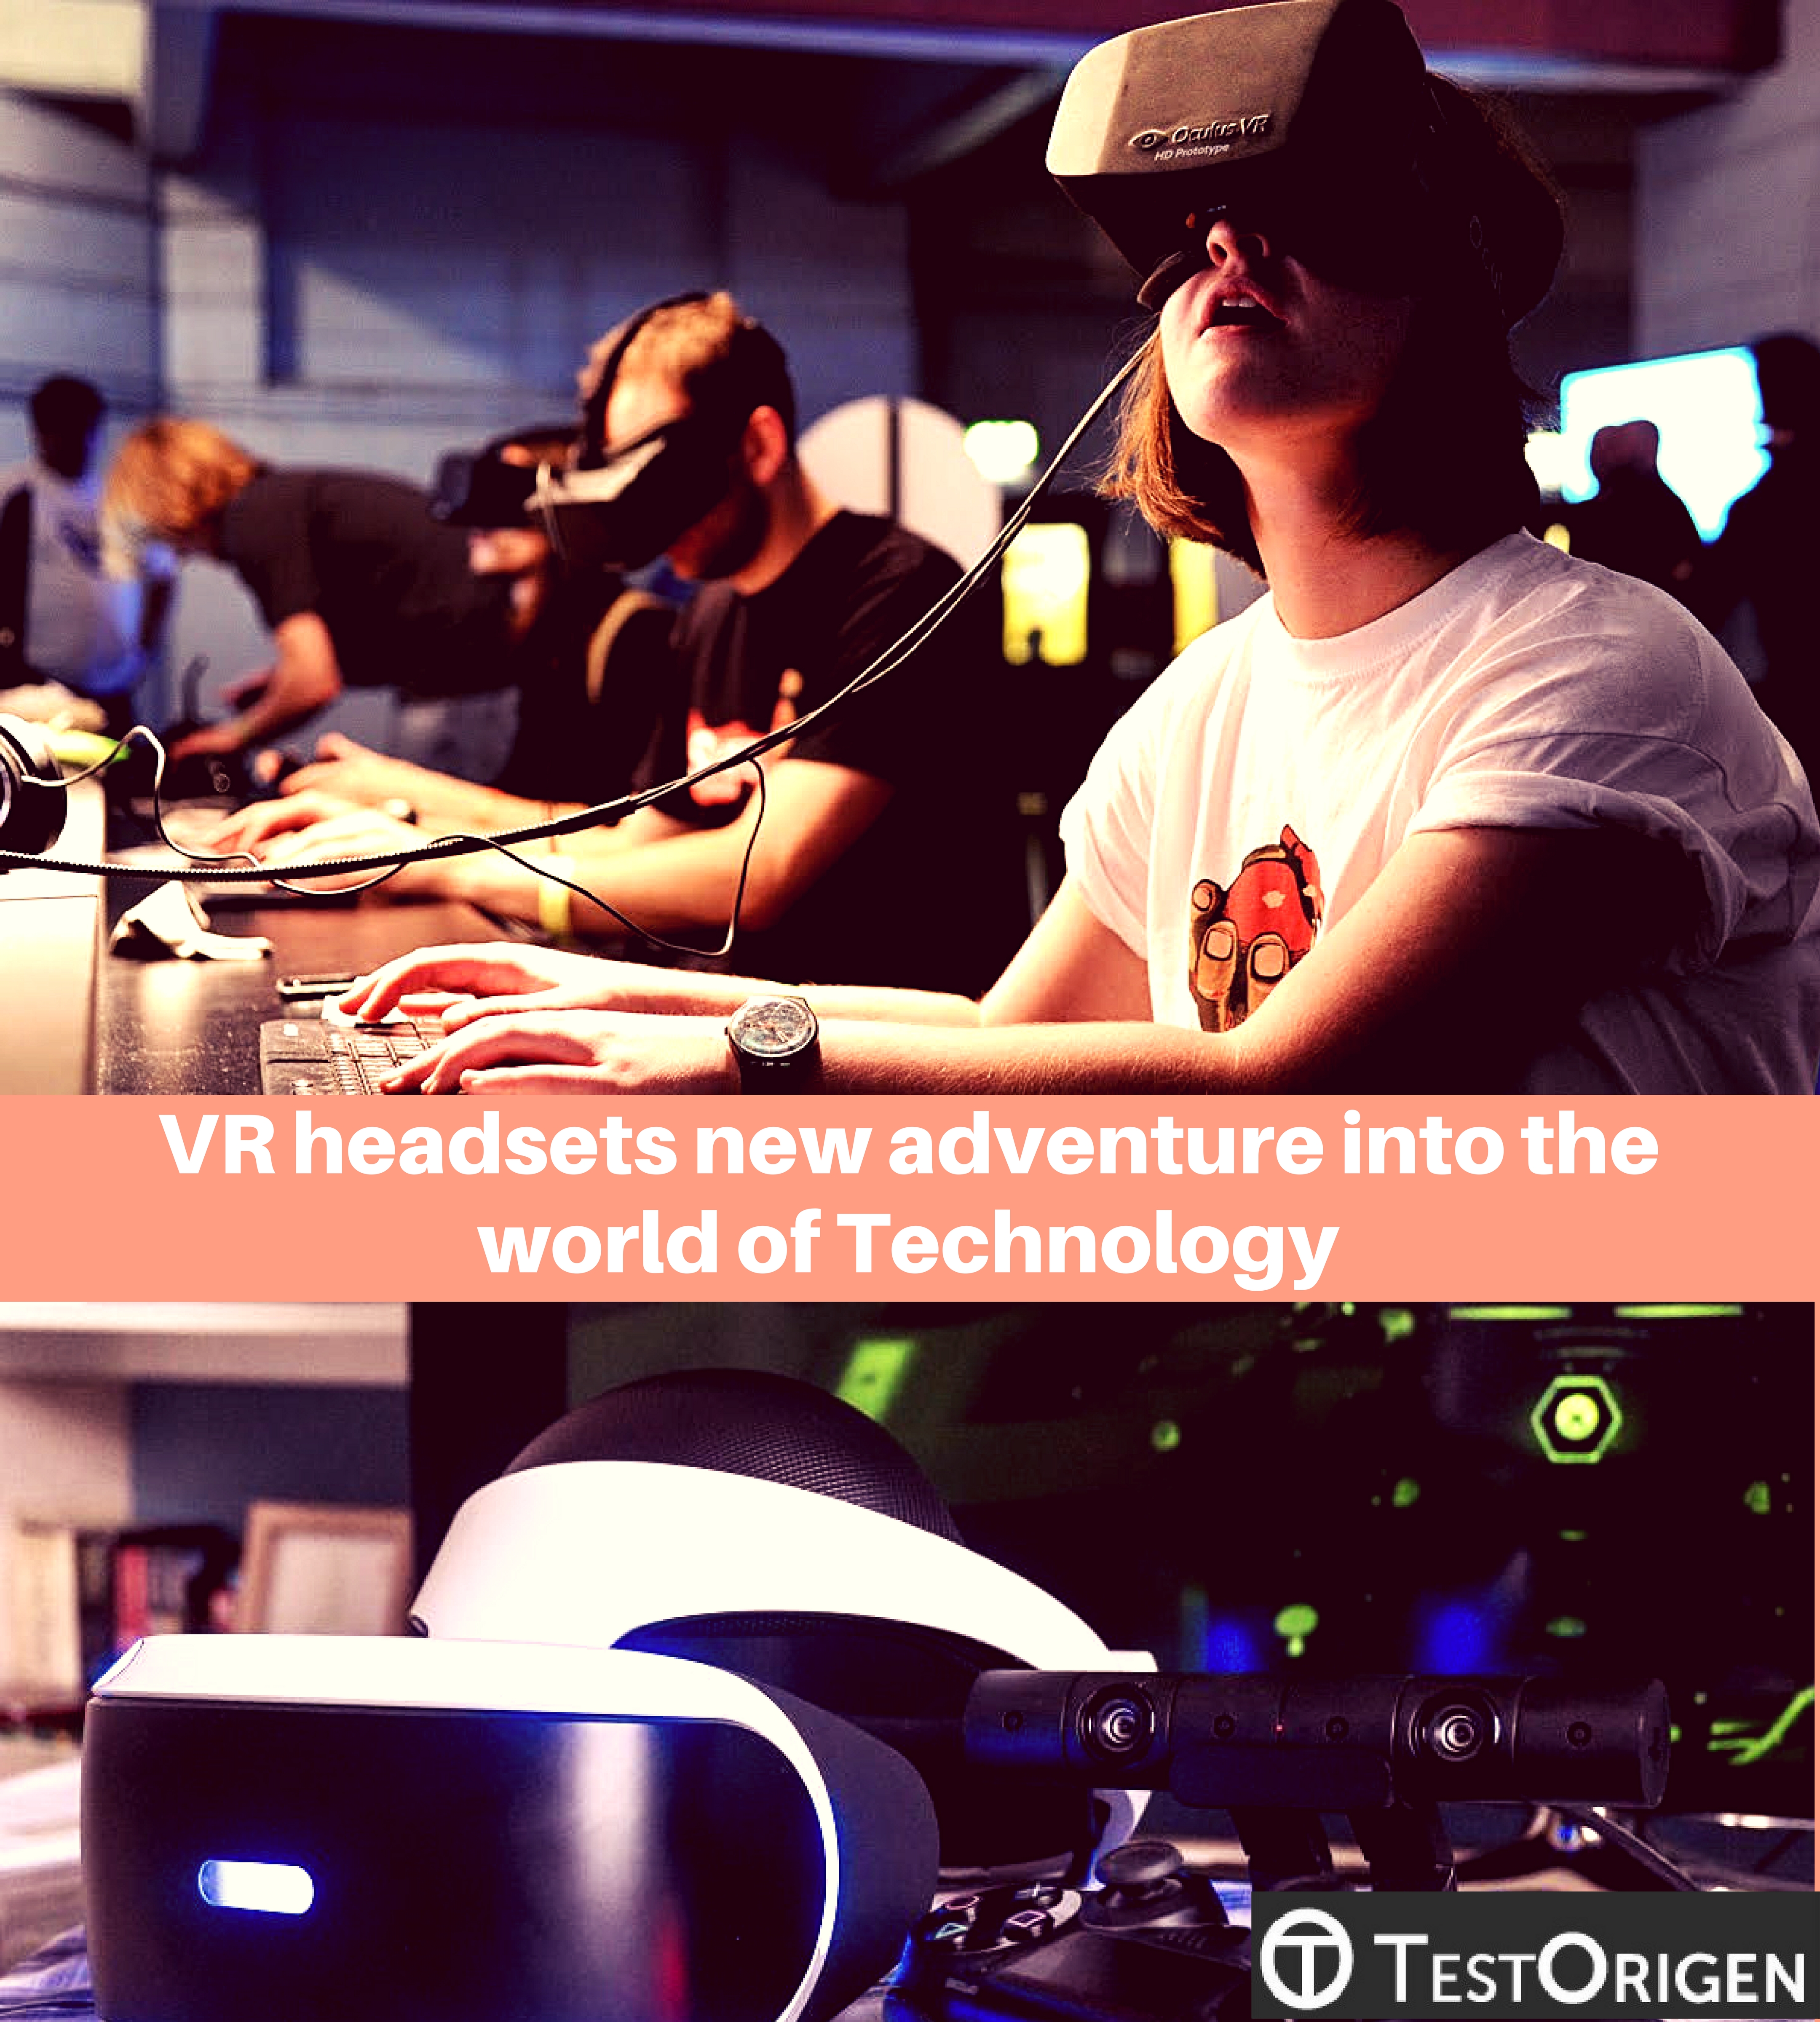 VR headsets new adventure into the world of Technology